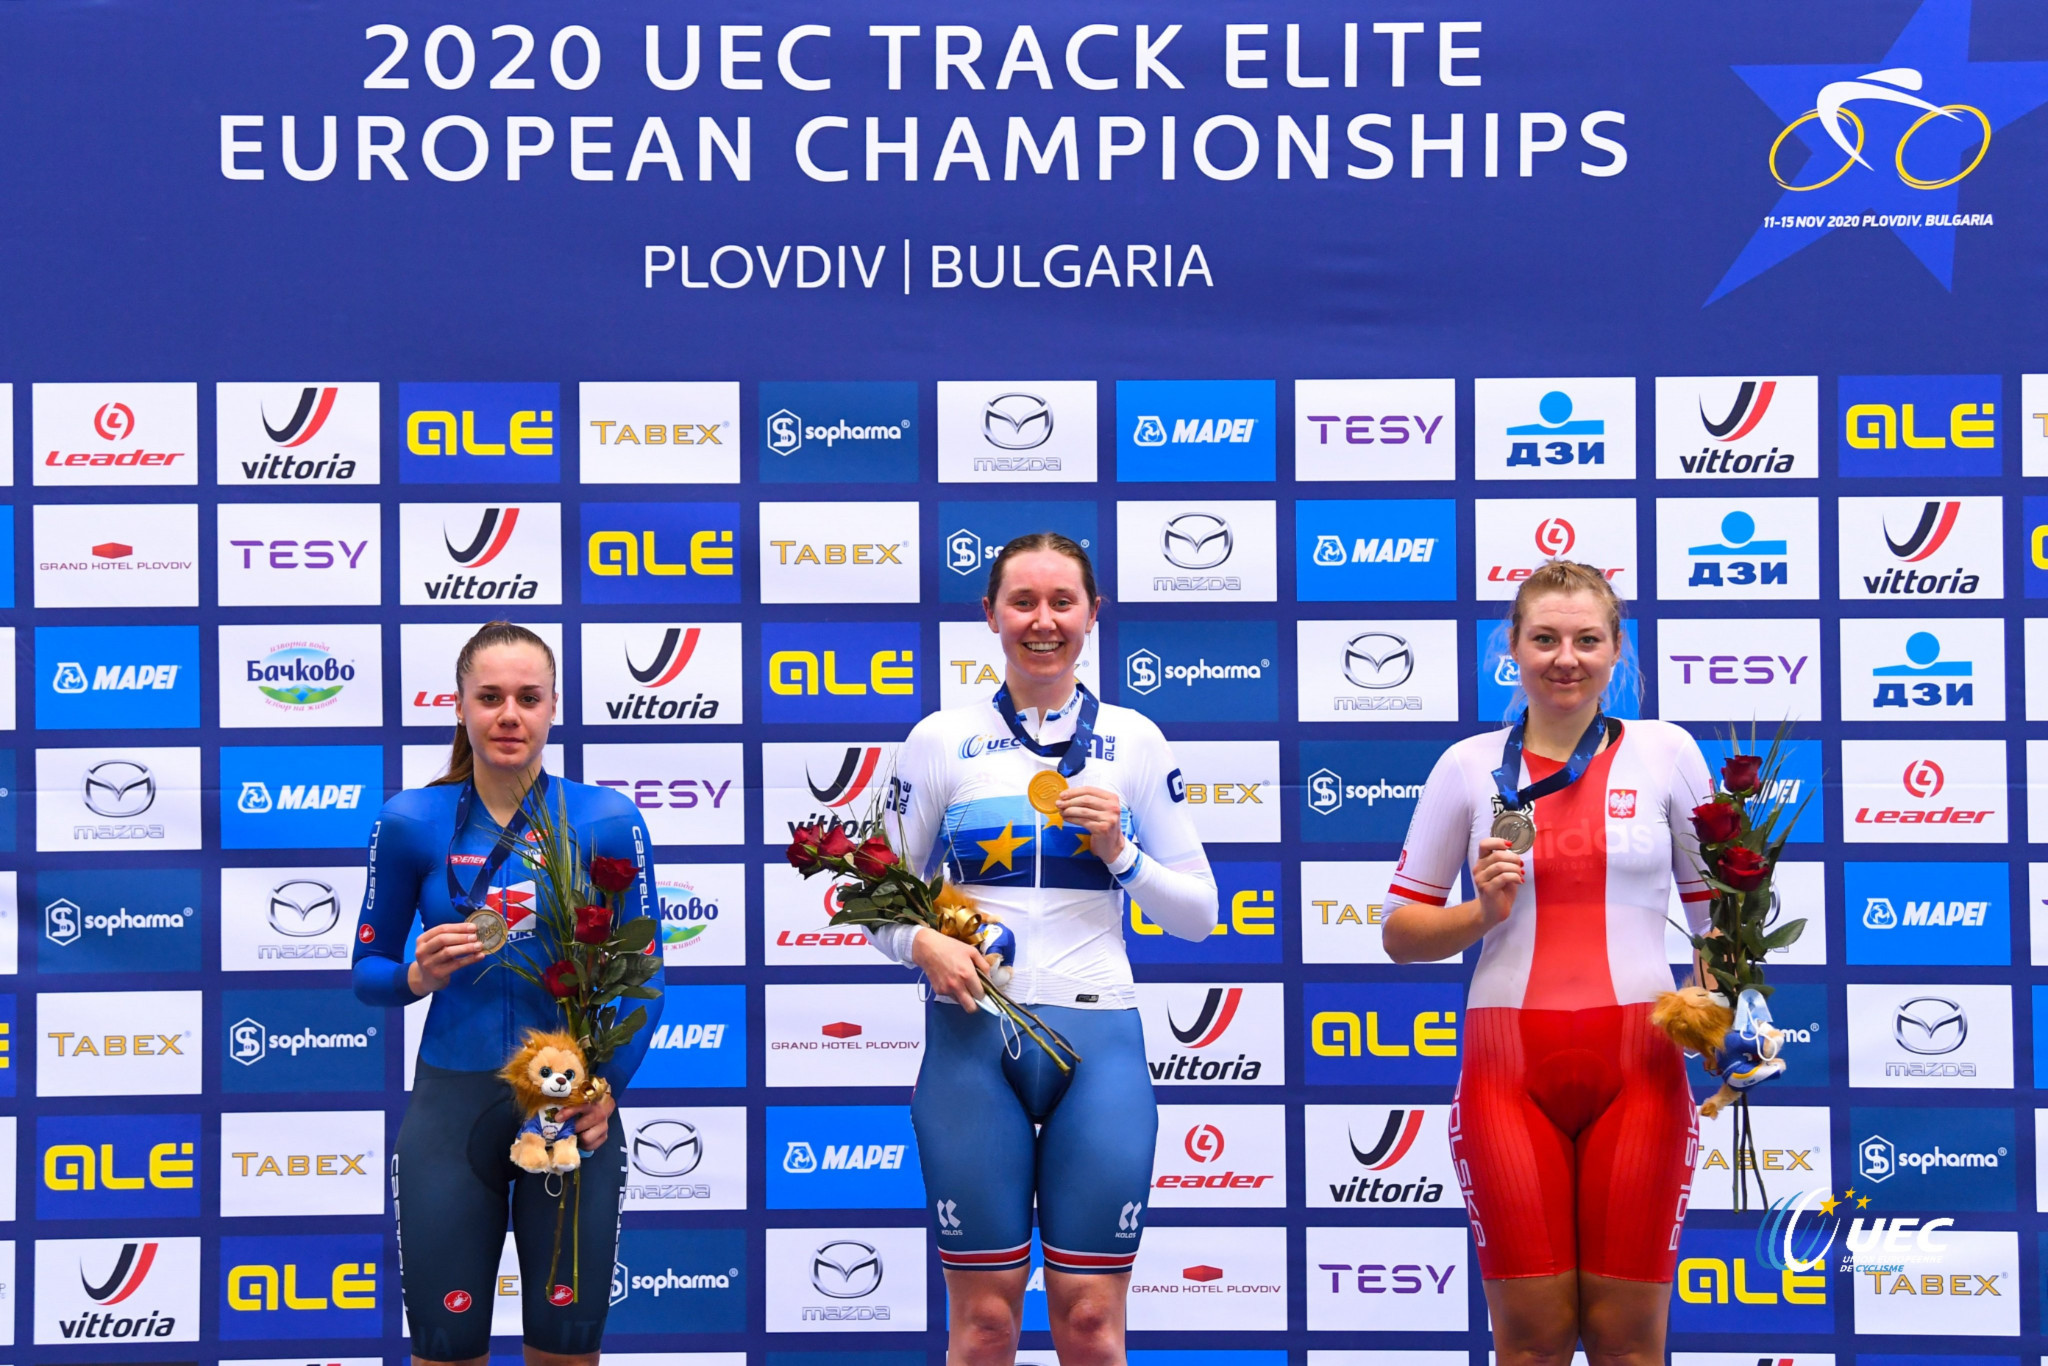 Britain retain place at top of UEC Elite Track European Championships medal table after Archibald gold